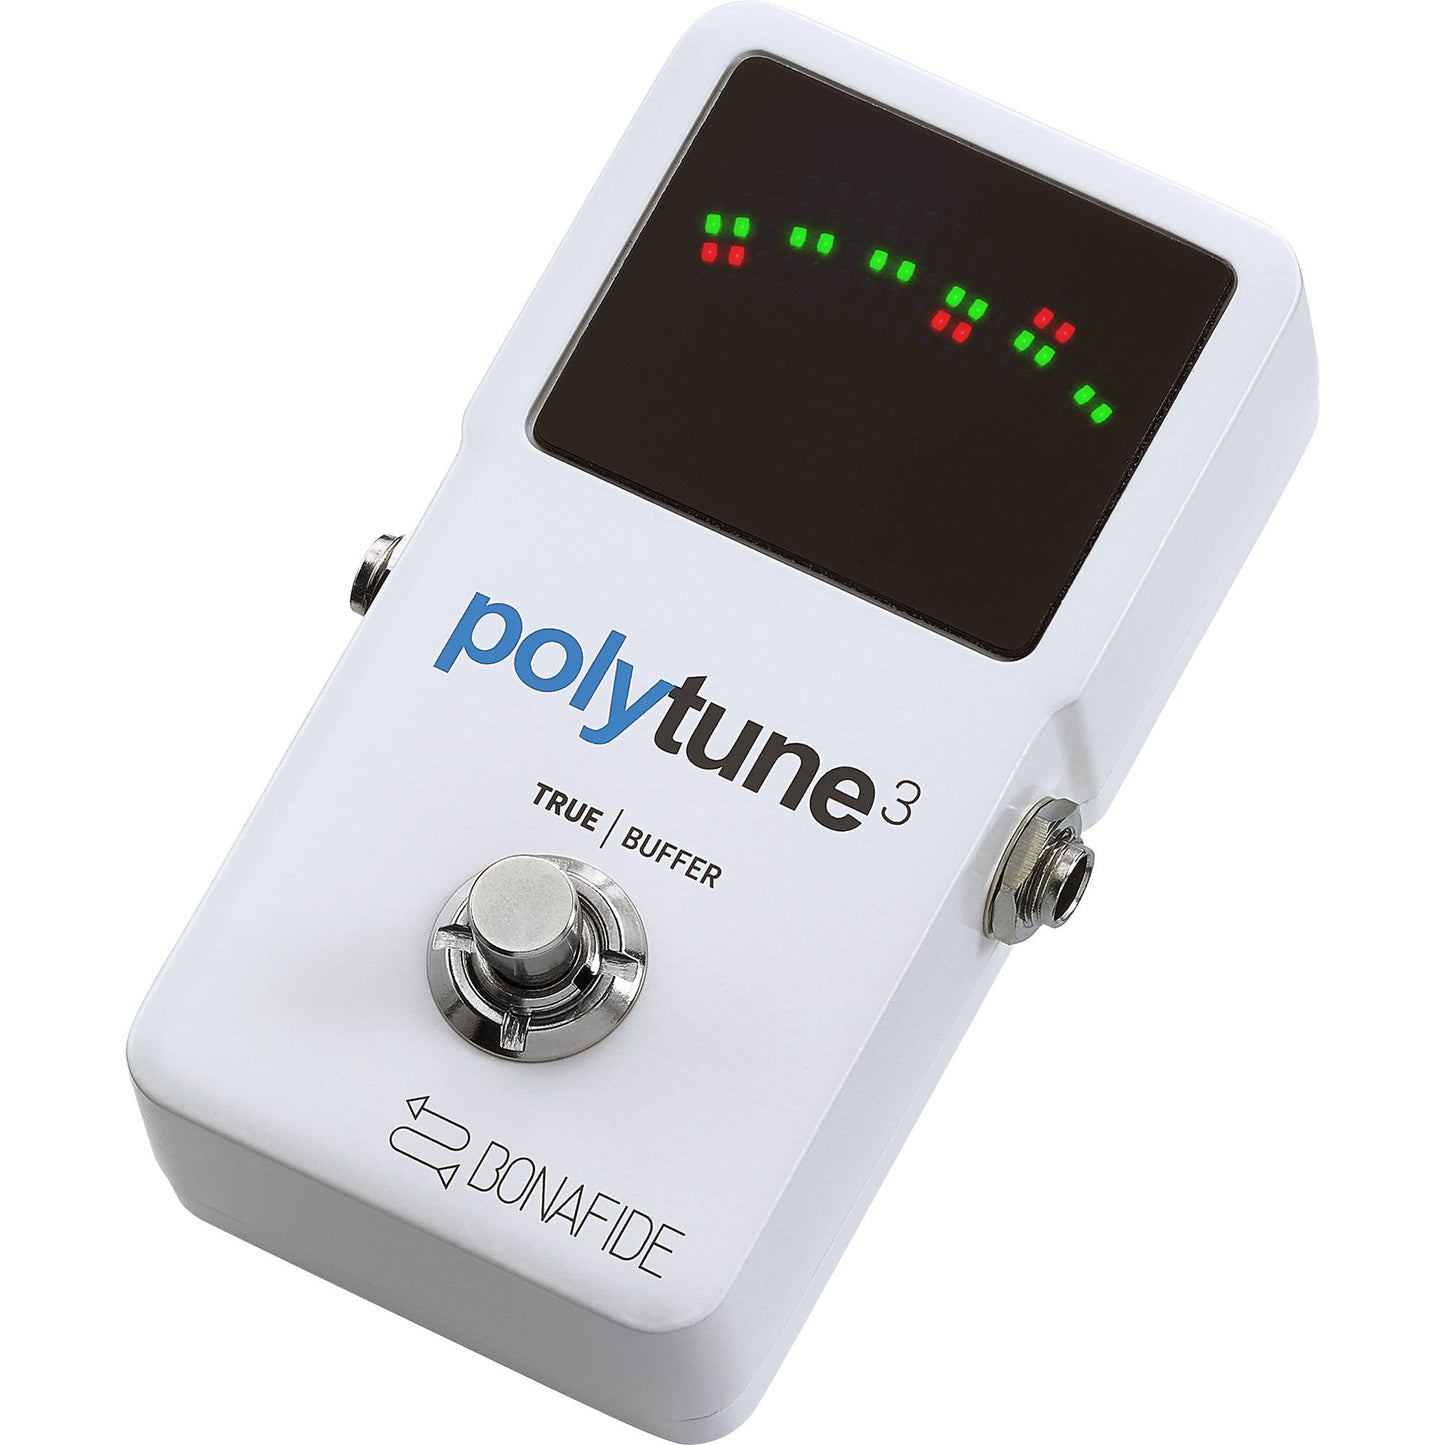 TC Electronic PolyTune 3 Polyphonic LED Guitar Tuner Pedal with Buffer